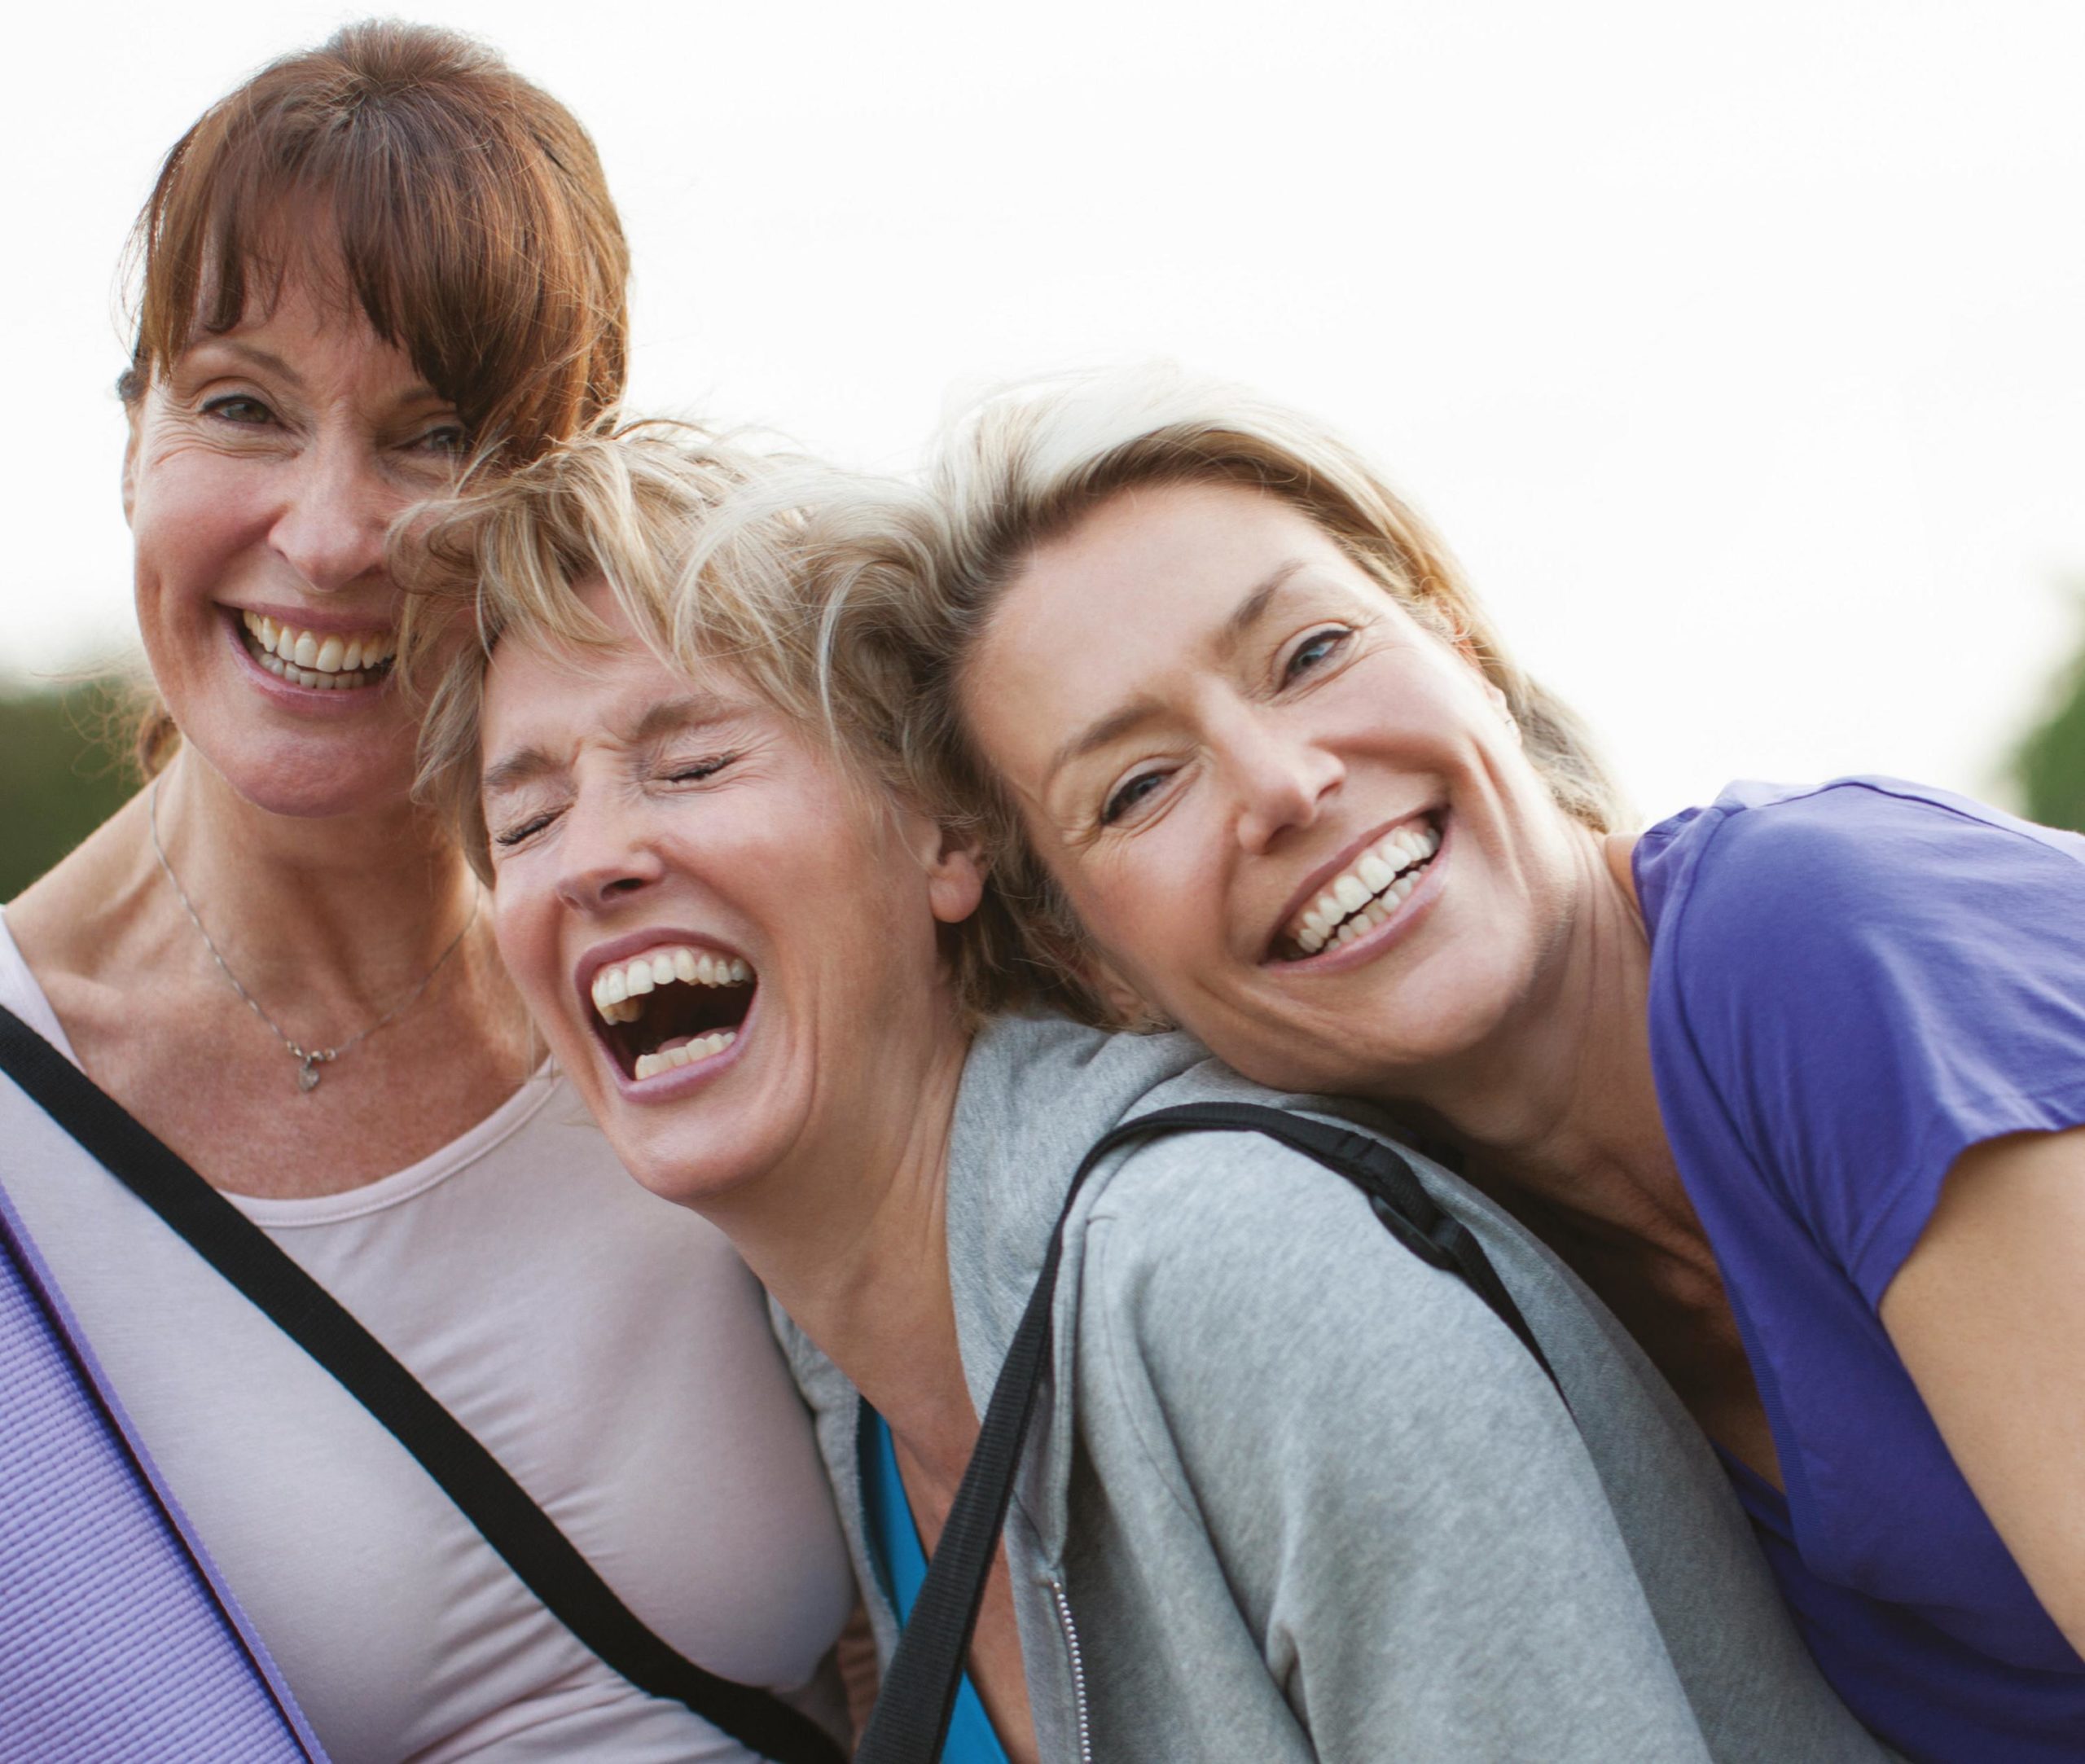 Discover The Benefits Of Laughter Therapy - Health & Wellbeing